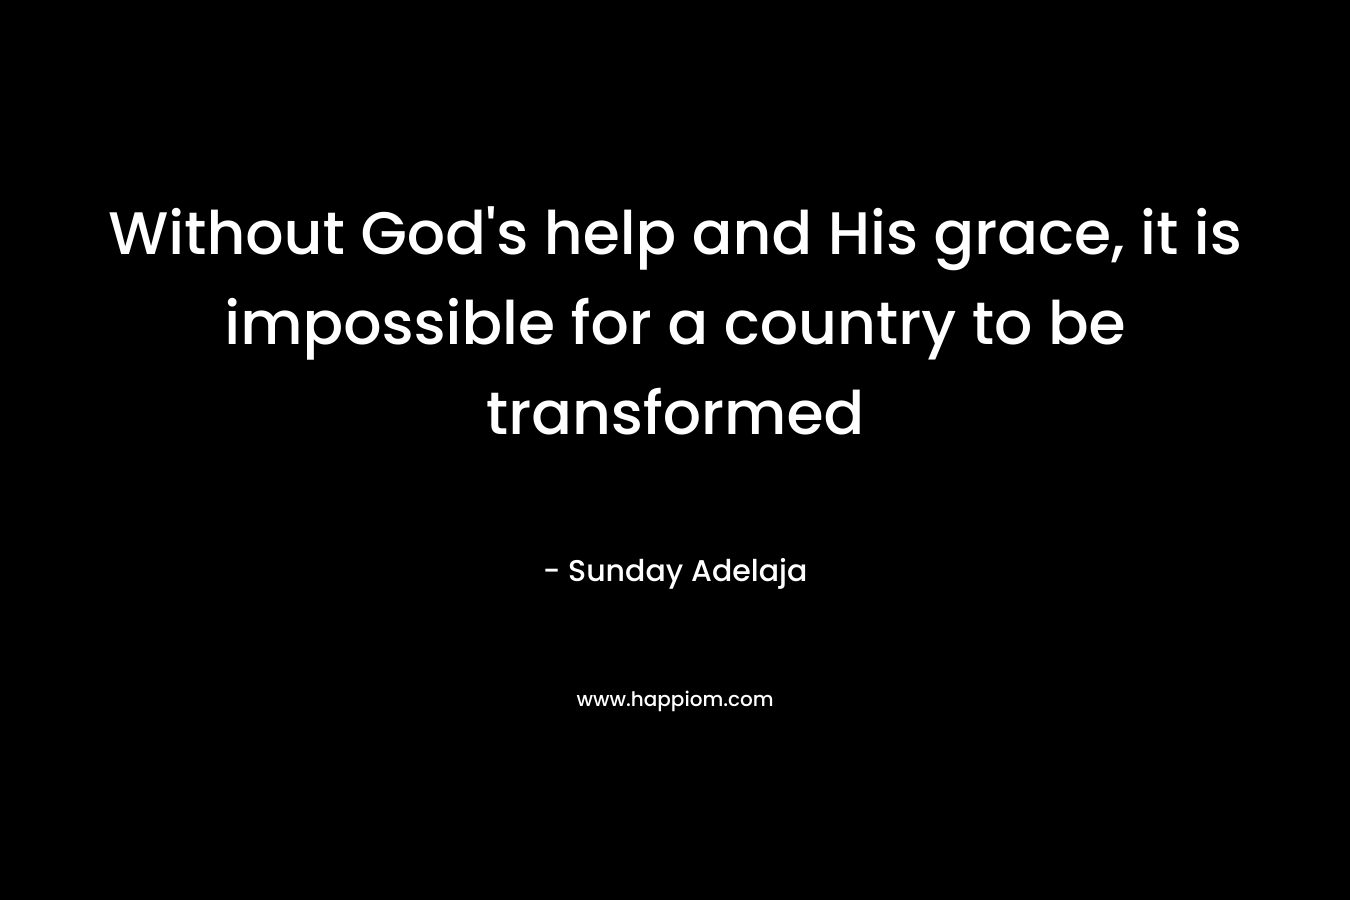 Without God’s help and His grace, it is impossible for a country to be transformed – Sunday Adelaja